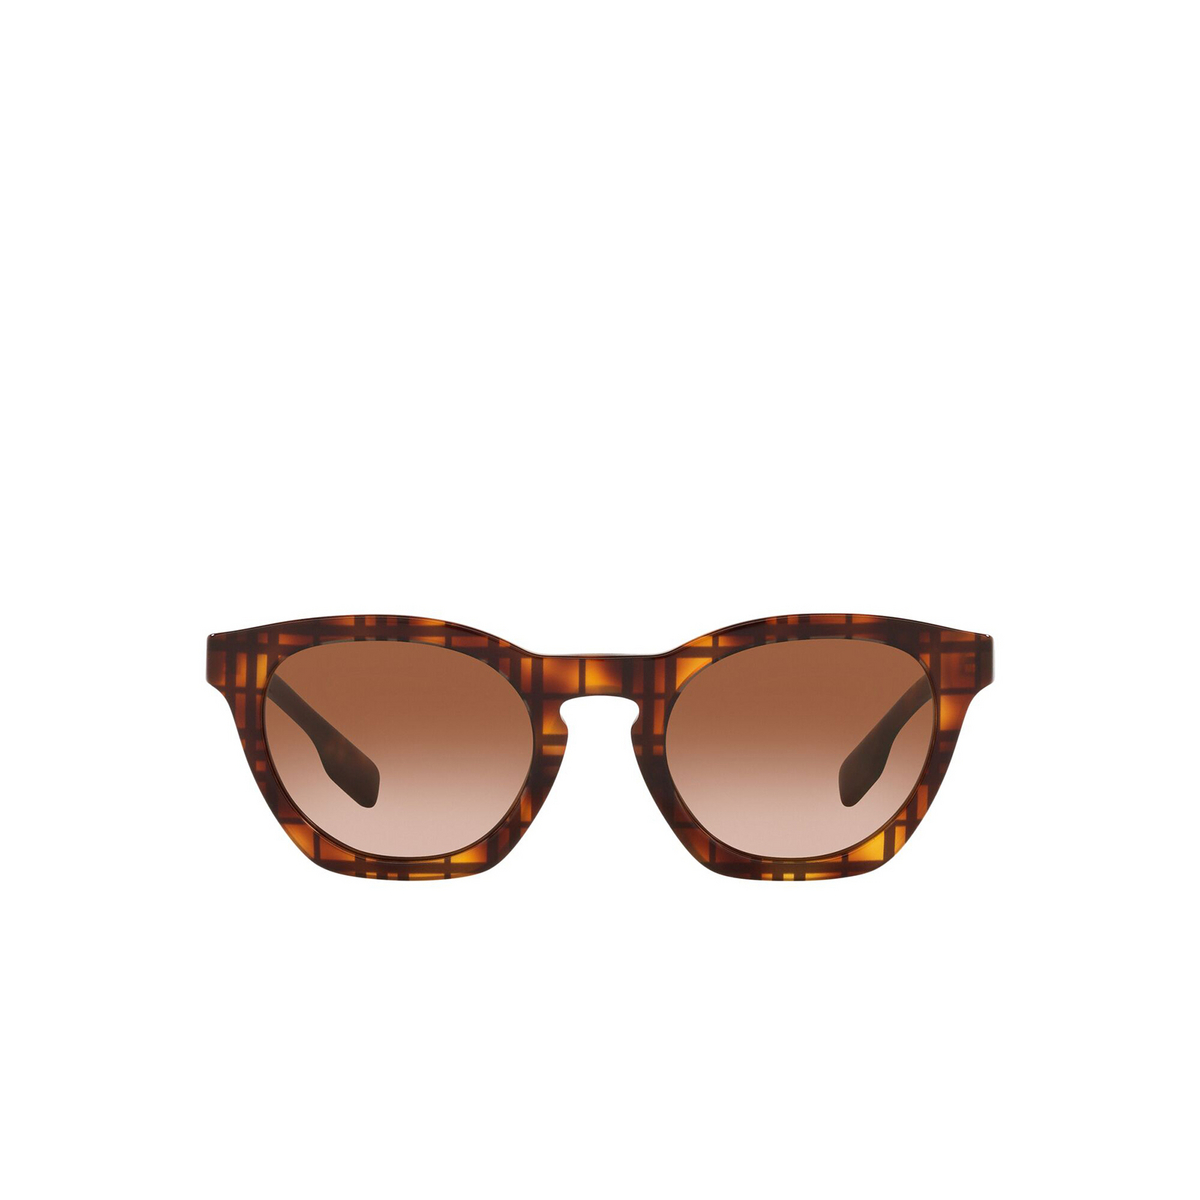 Burberry® Irregular Sunglasses: Yvette BE4367 color Top Check / Striped Brown 398113 - front view.